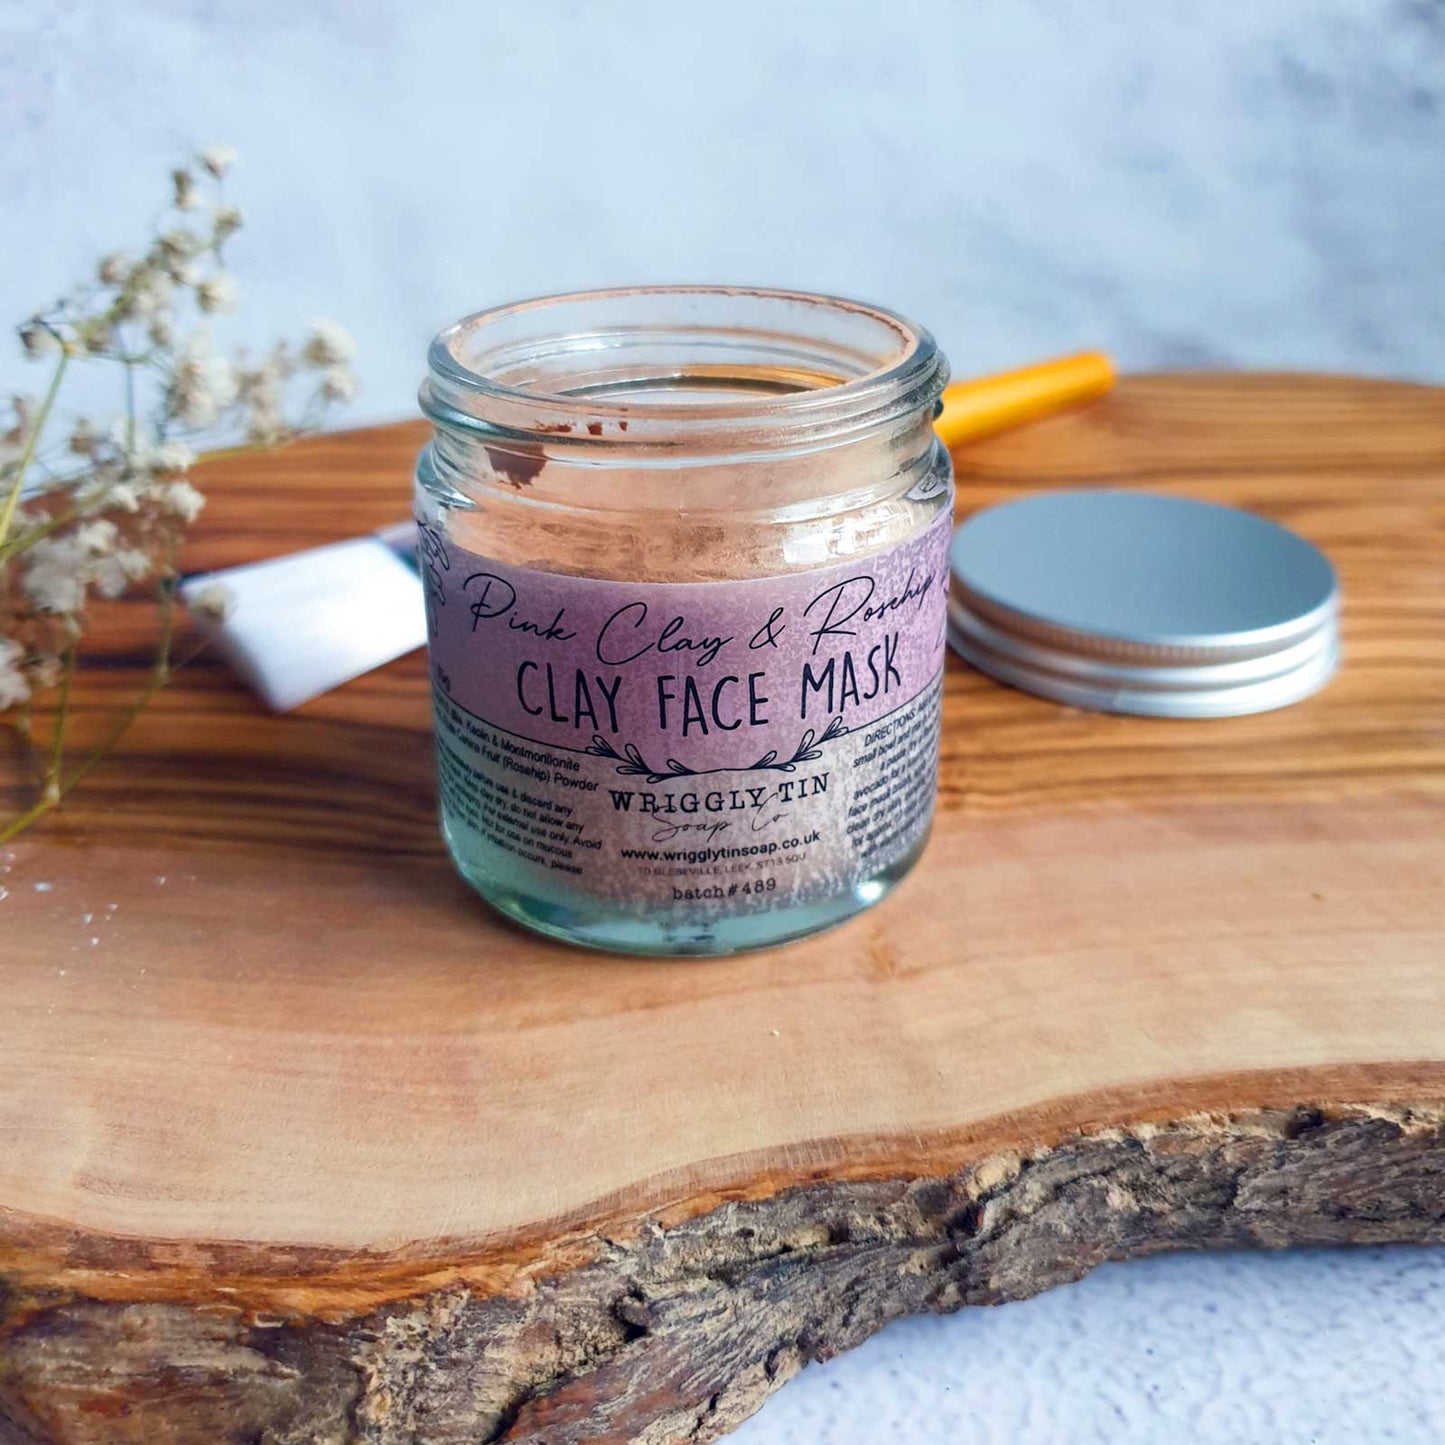 CLAY FACE MASK - with botanical extracts